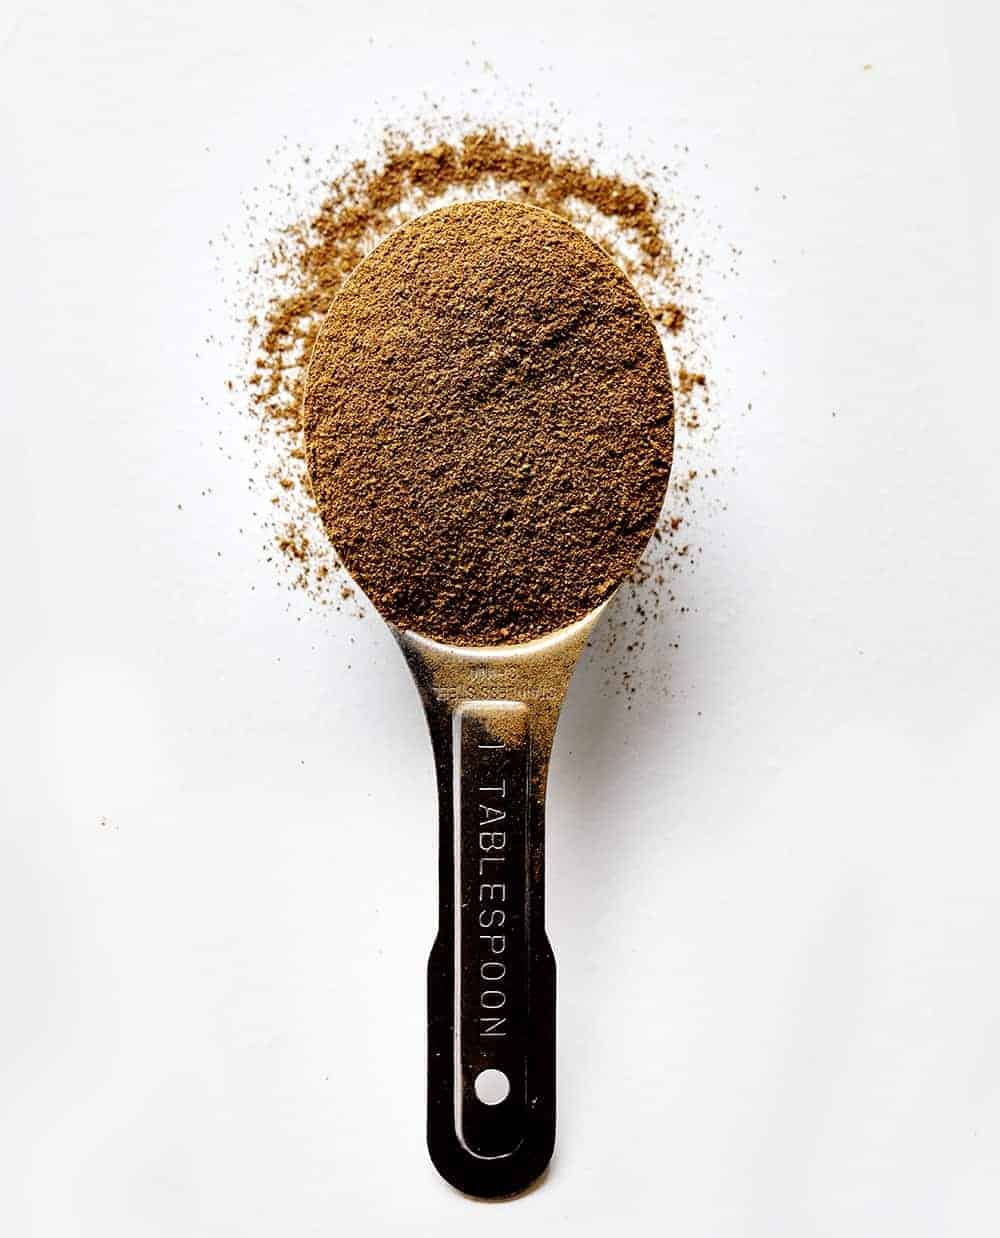 Apple Pie Spice Blend: Create a Flavorful Addition to Your Recipes